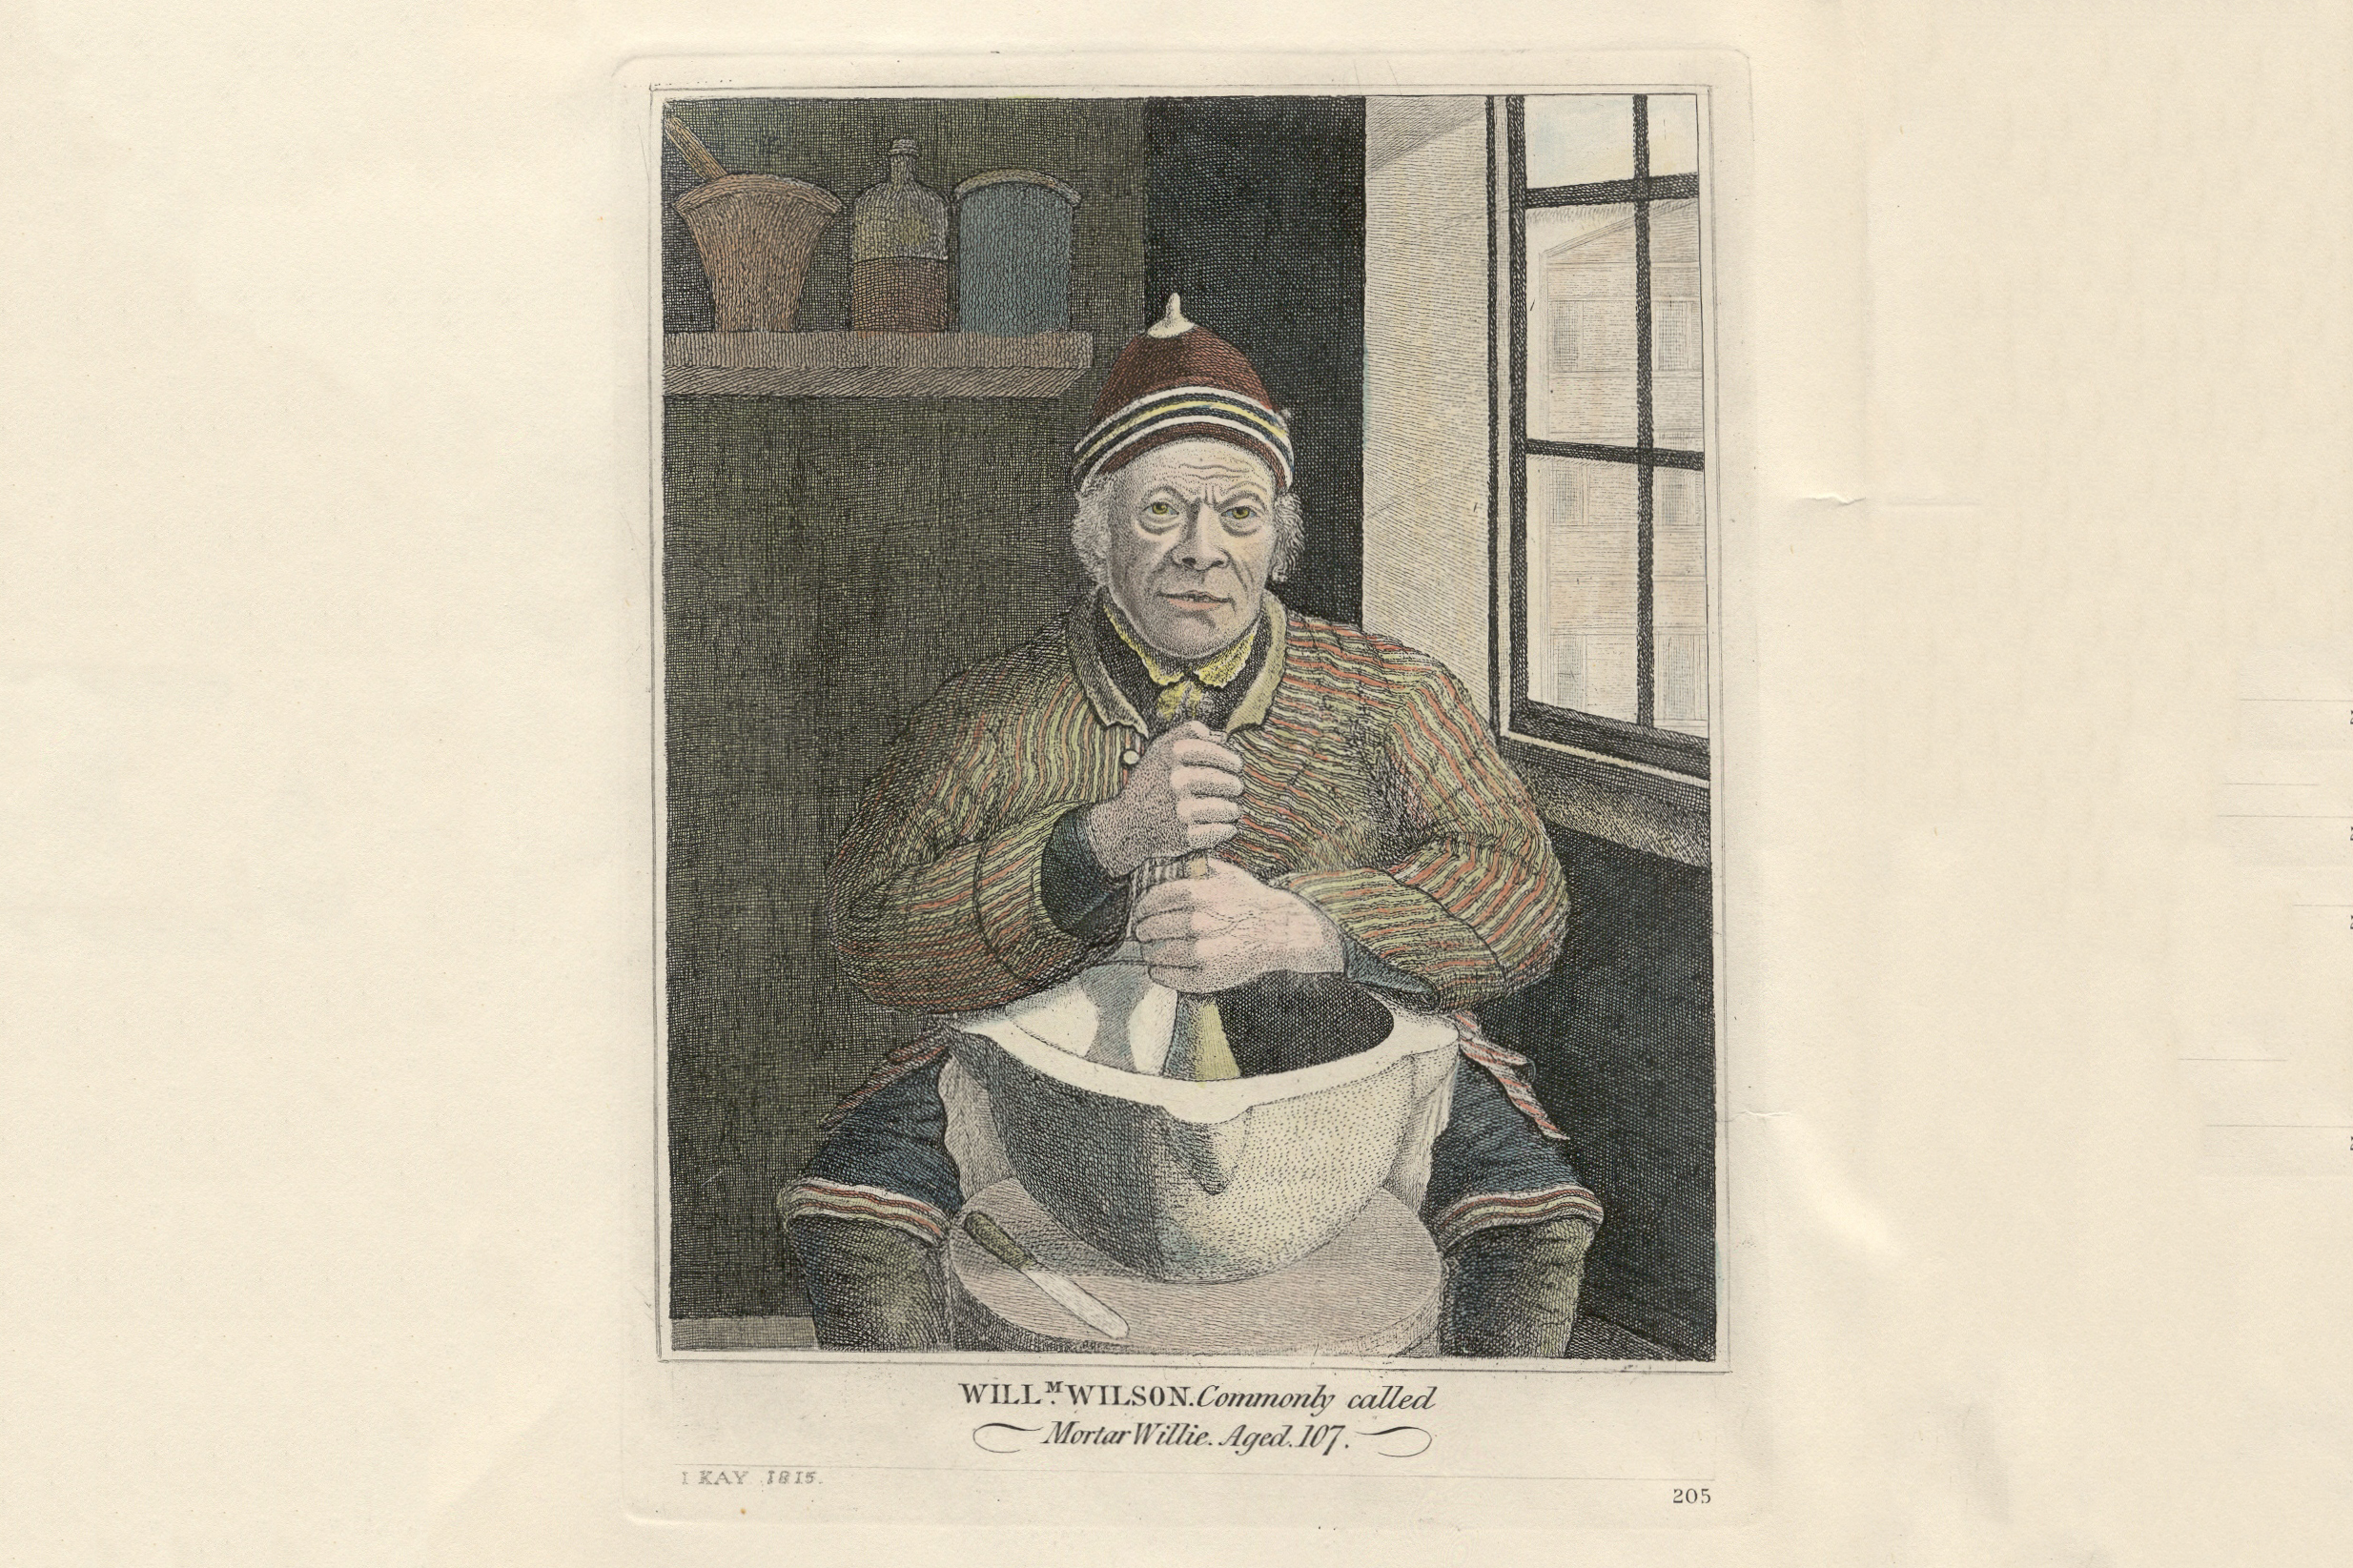 Coloured etching and aquatint of Morar Willie